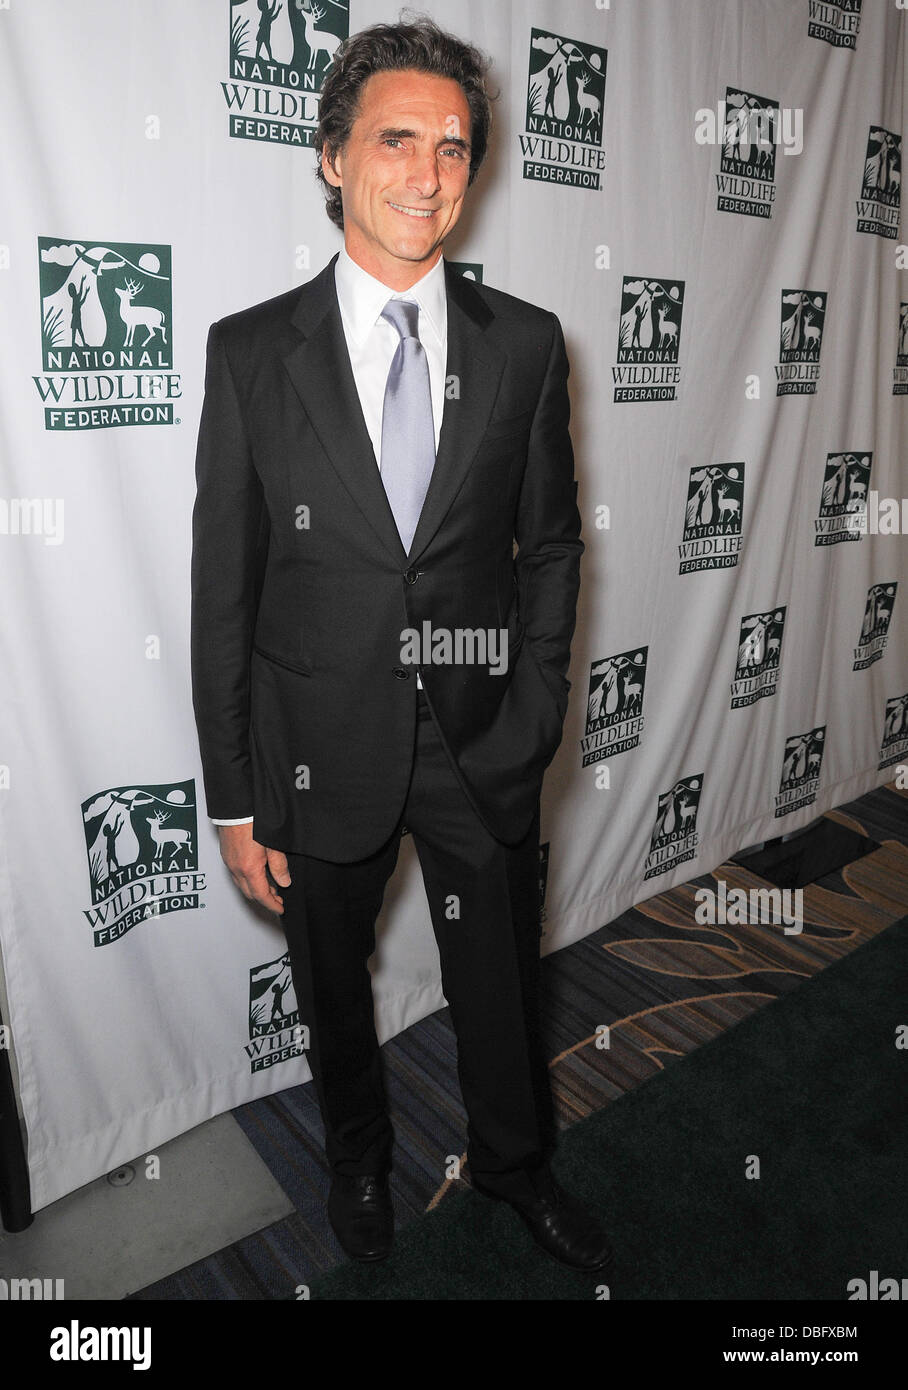 Lawrence Bender The National Wildlife Federation Celebrates 75 Years with Voices For Wildlife Gala held at The Beverly Wilshire Four Seasons Hotel - Arrivals Beverly Hills, California - 15.06.11 Stock Photo